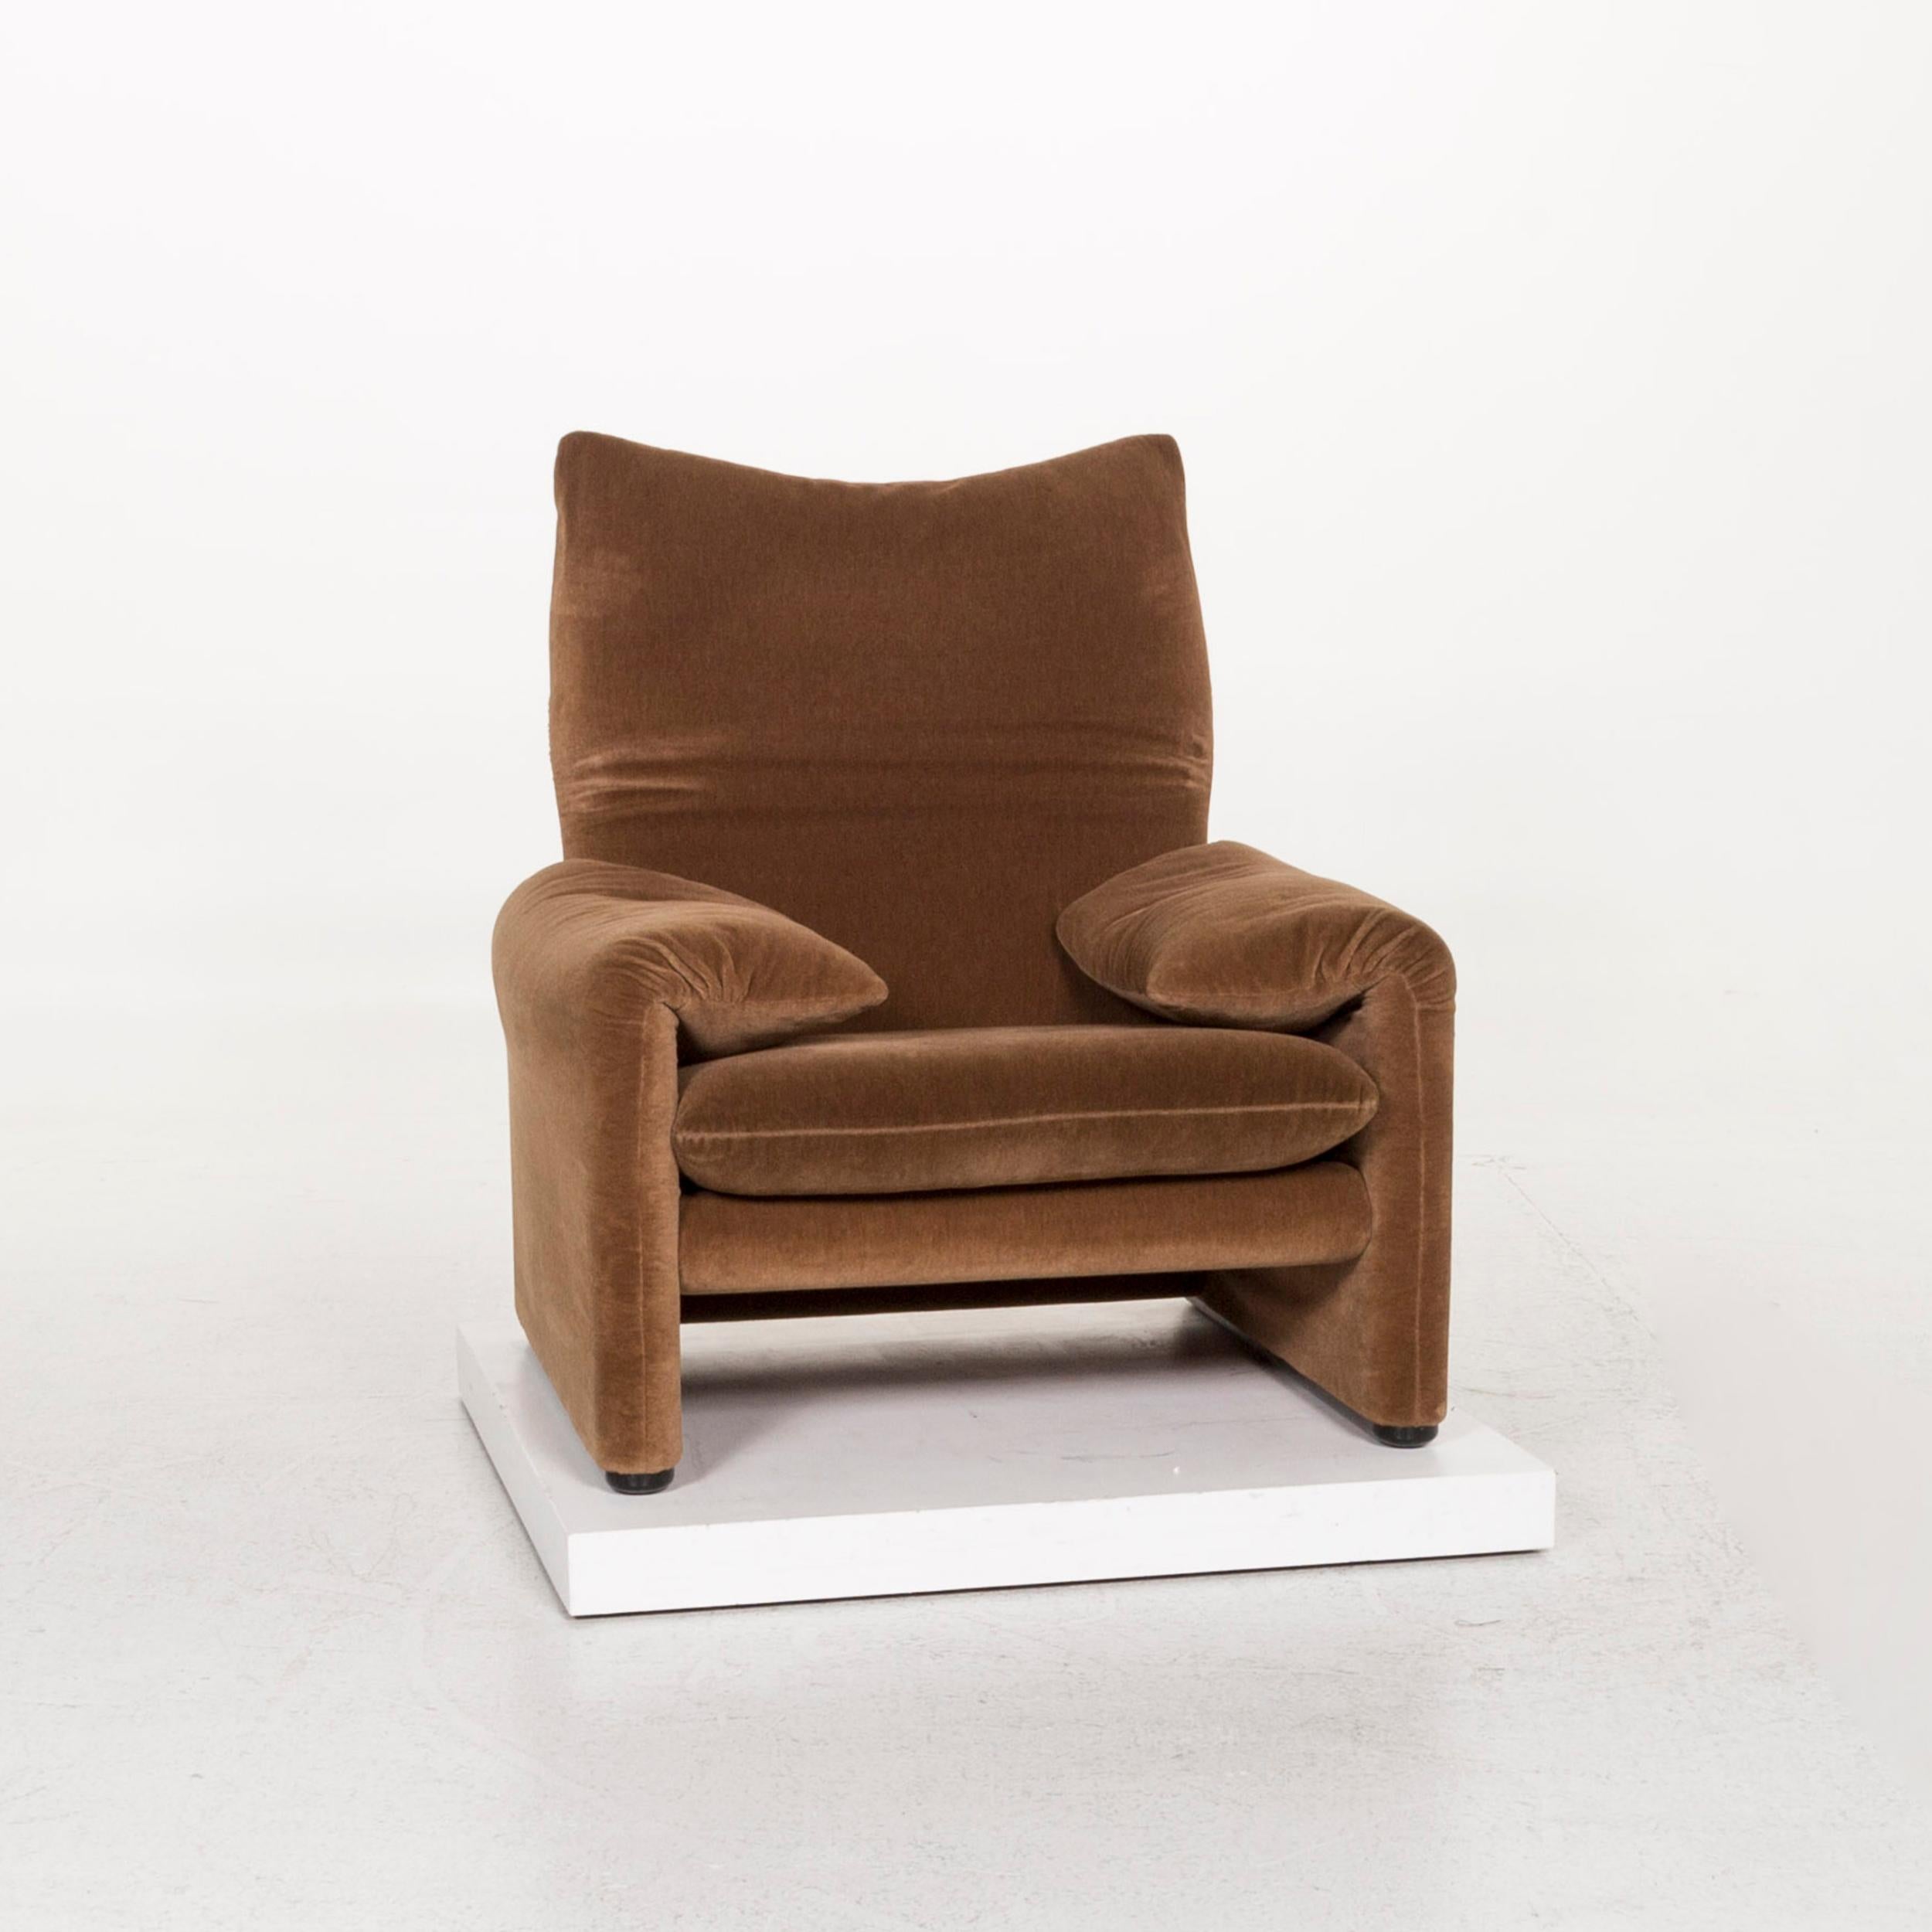 We bring to you a Cassina Maralunga fabric armchair set brown function.

 

 Product measurements in centimeters:
 

Depth 84
Width 98
Height 68
Seat-height 42
Rest-height 55
Seat-depth 50
Seat-width 45
Back-height 26.